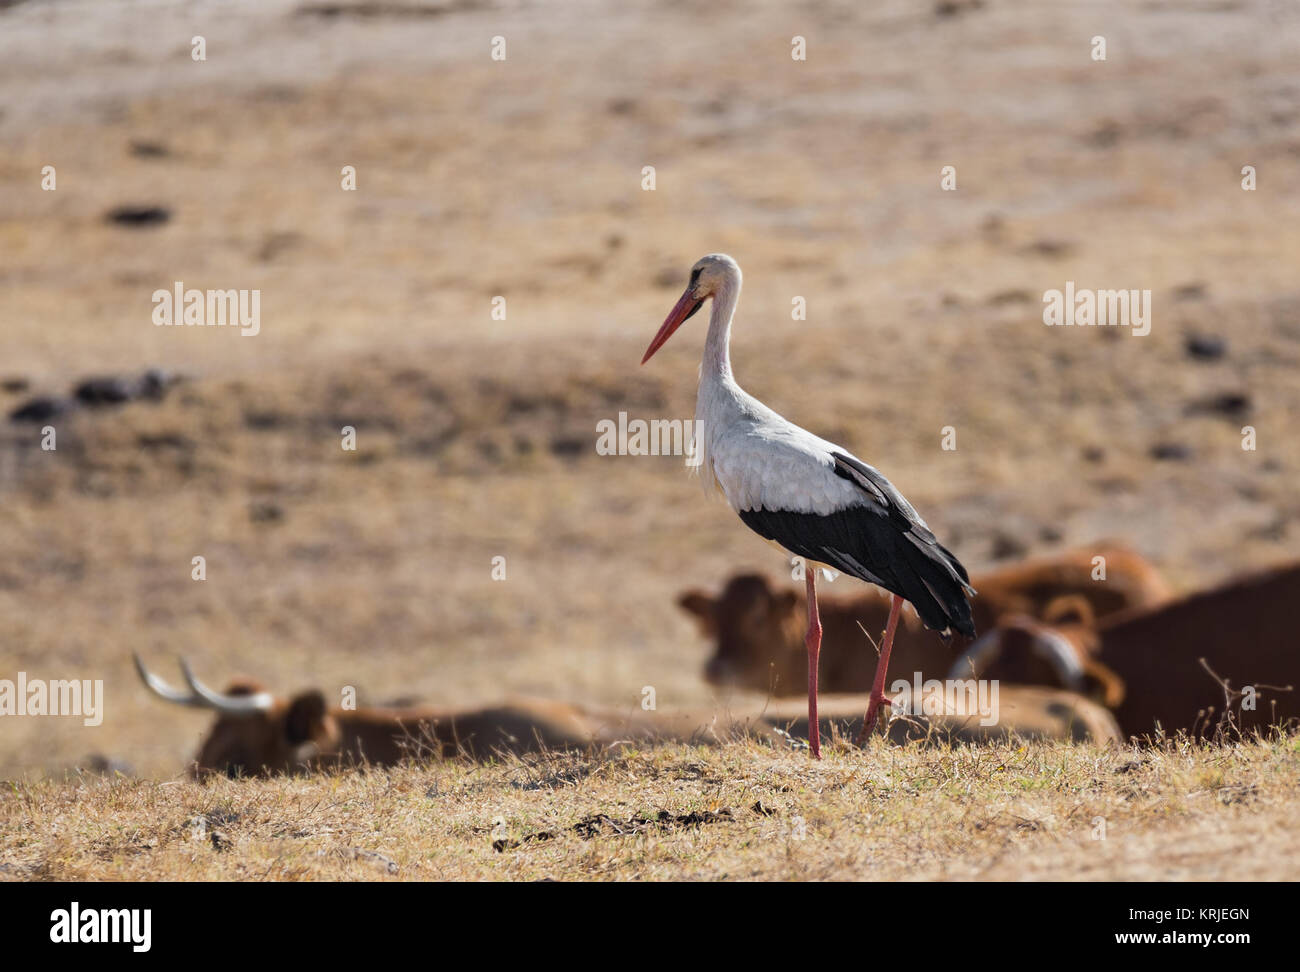 Stork photographed in their natural environment. Stock Photo